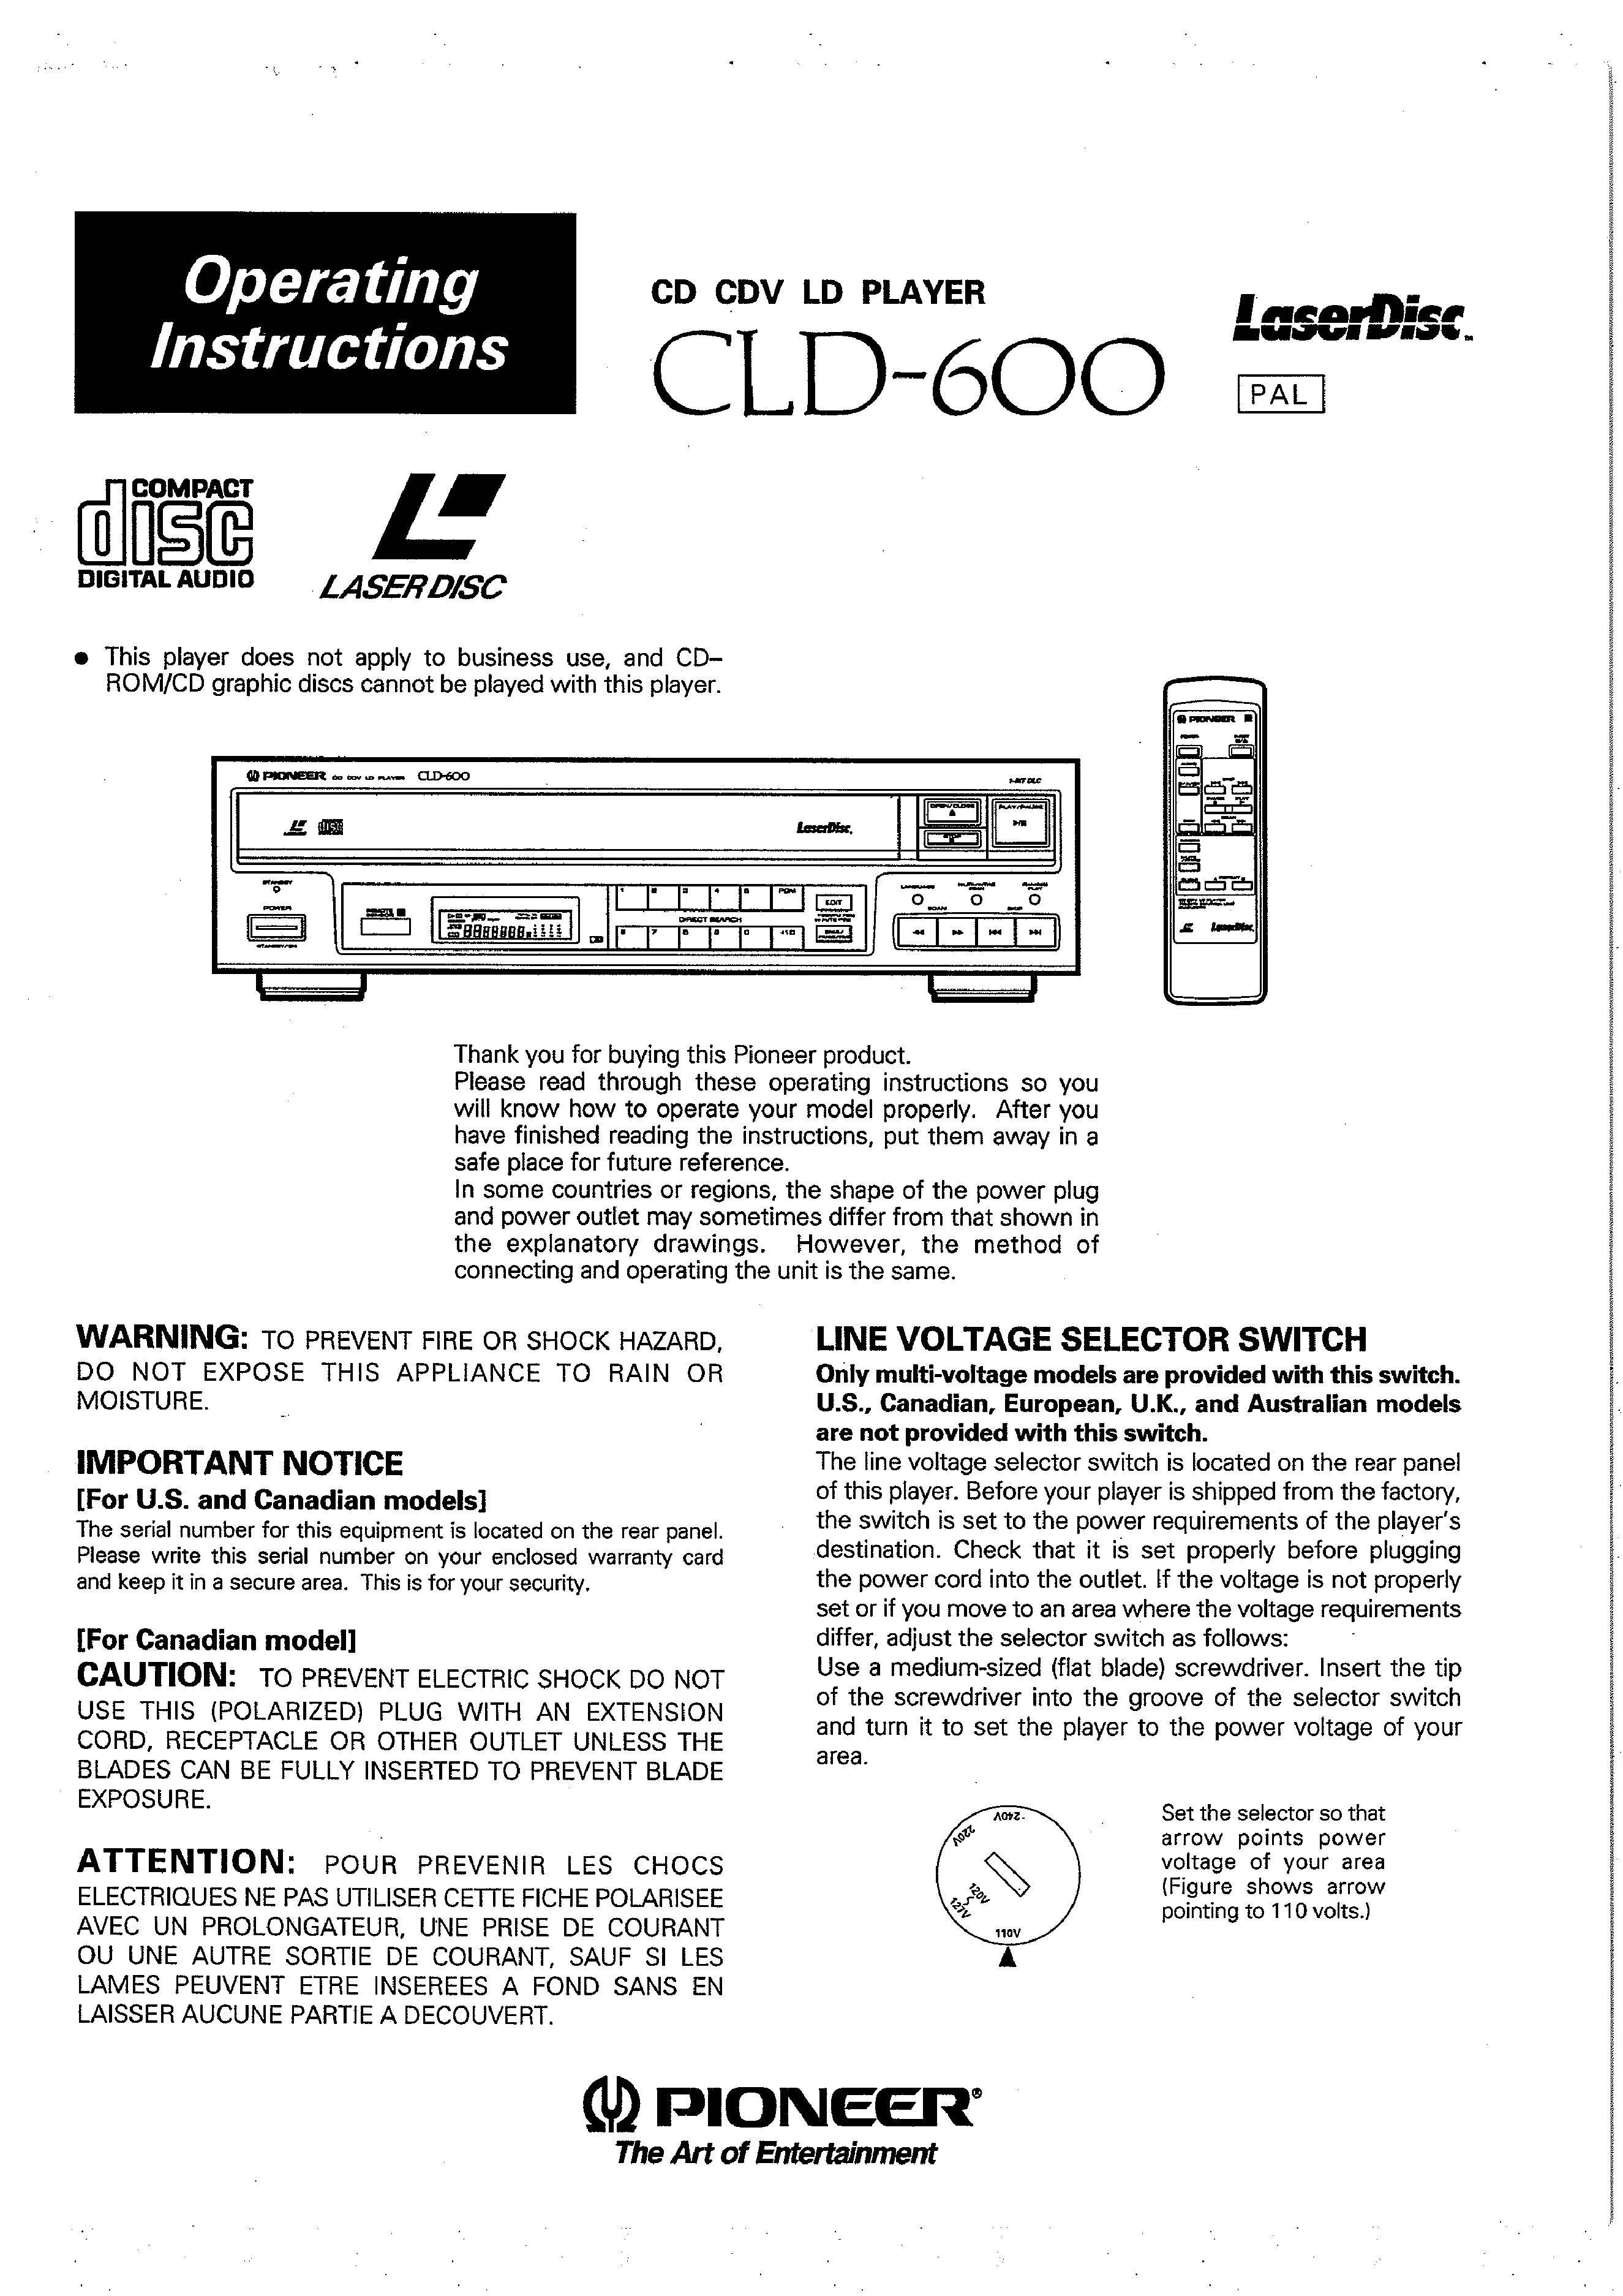 Pioneer CLD-600